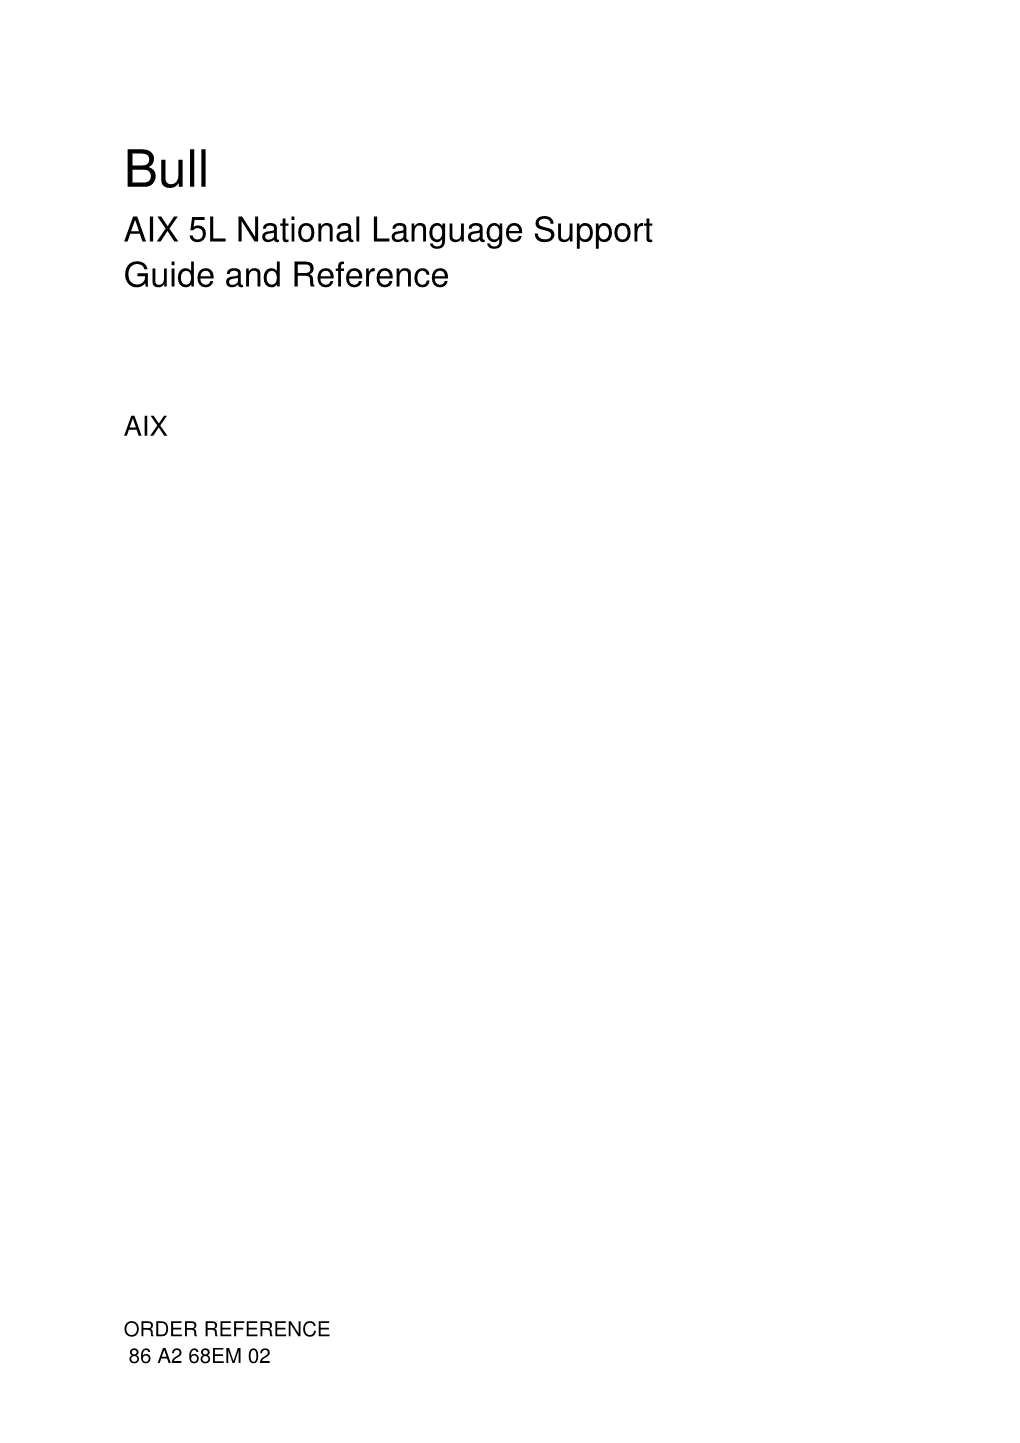 Bull AIX 5L National Language Support Guide and Reference